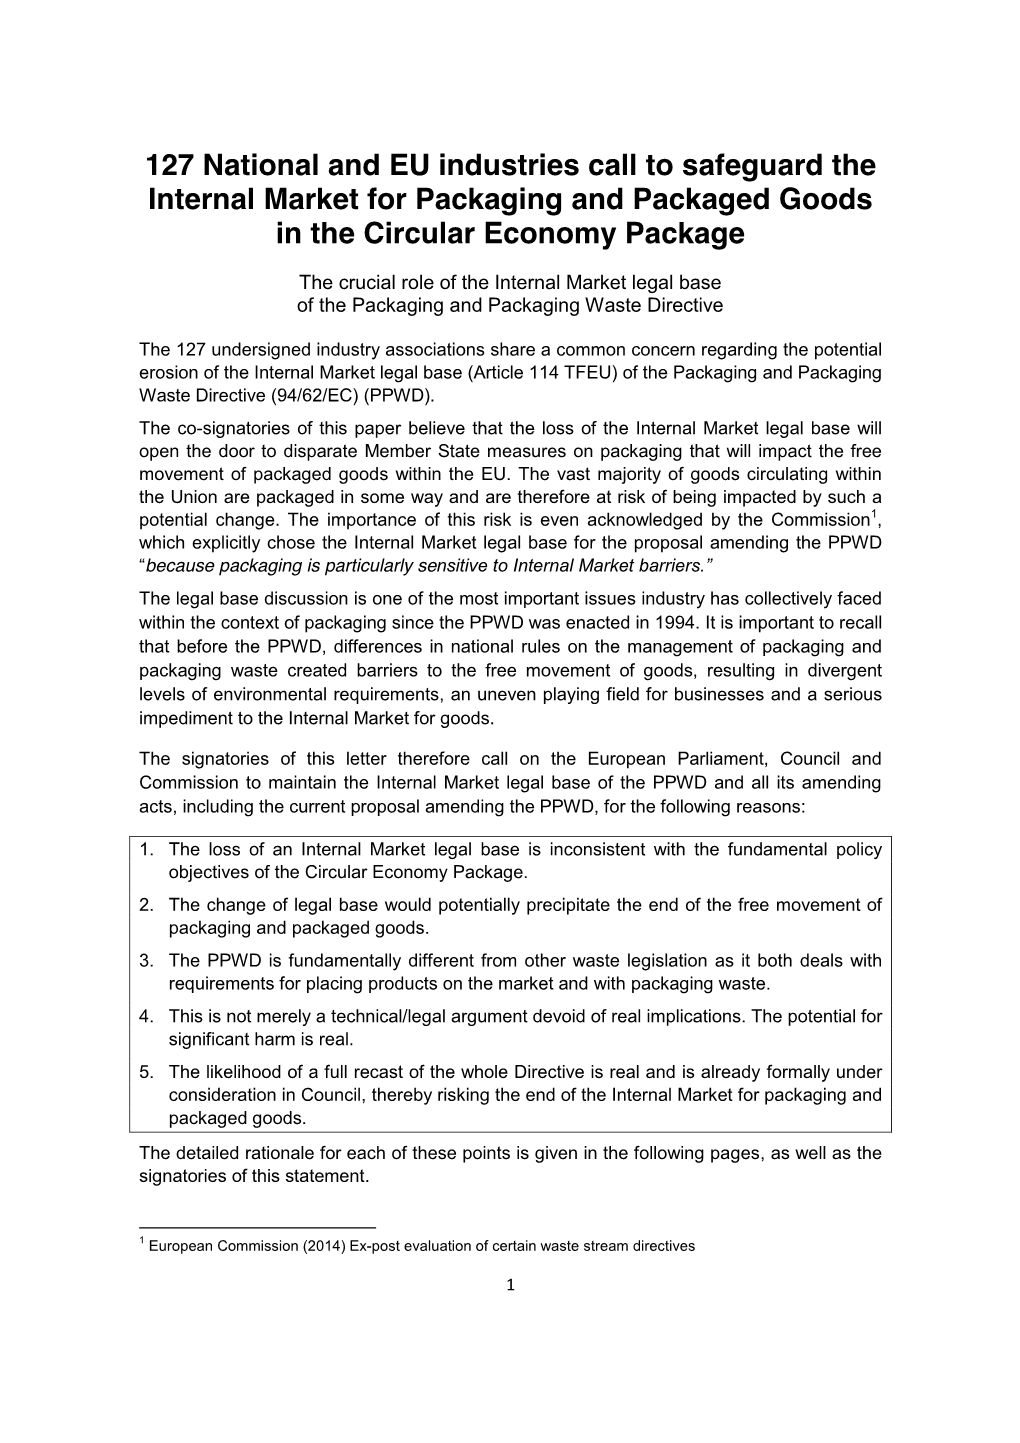 127 National and EU Industries Call to Safeguard the Internal Market for Packaging and Packaged Goods in the Circular Economy Package